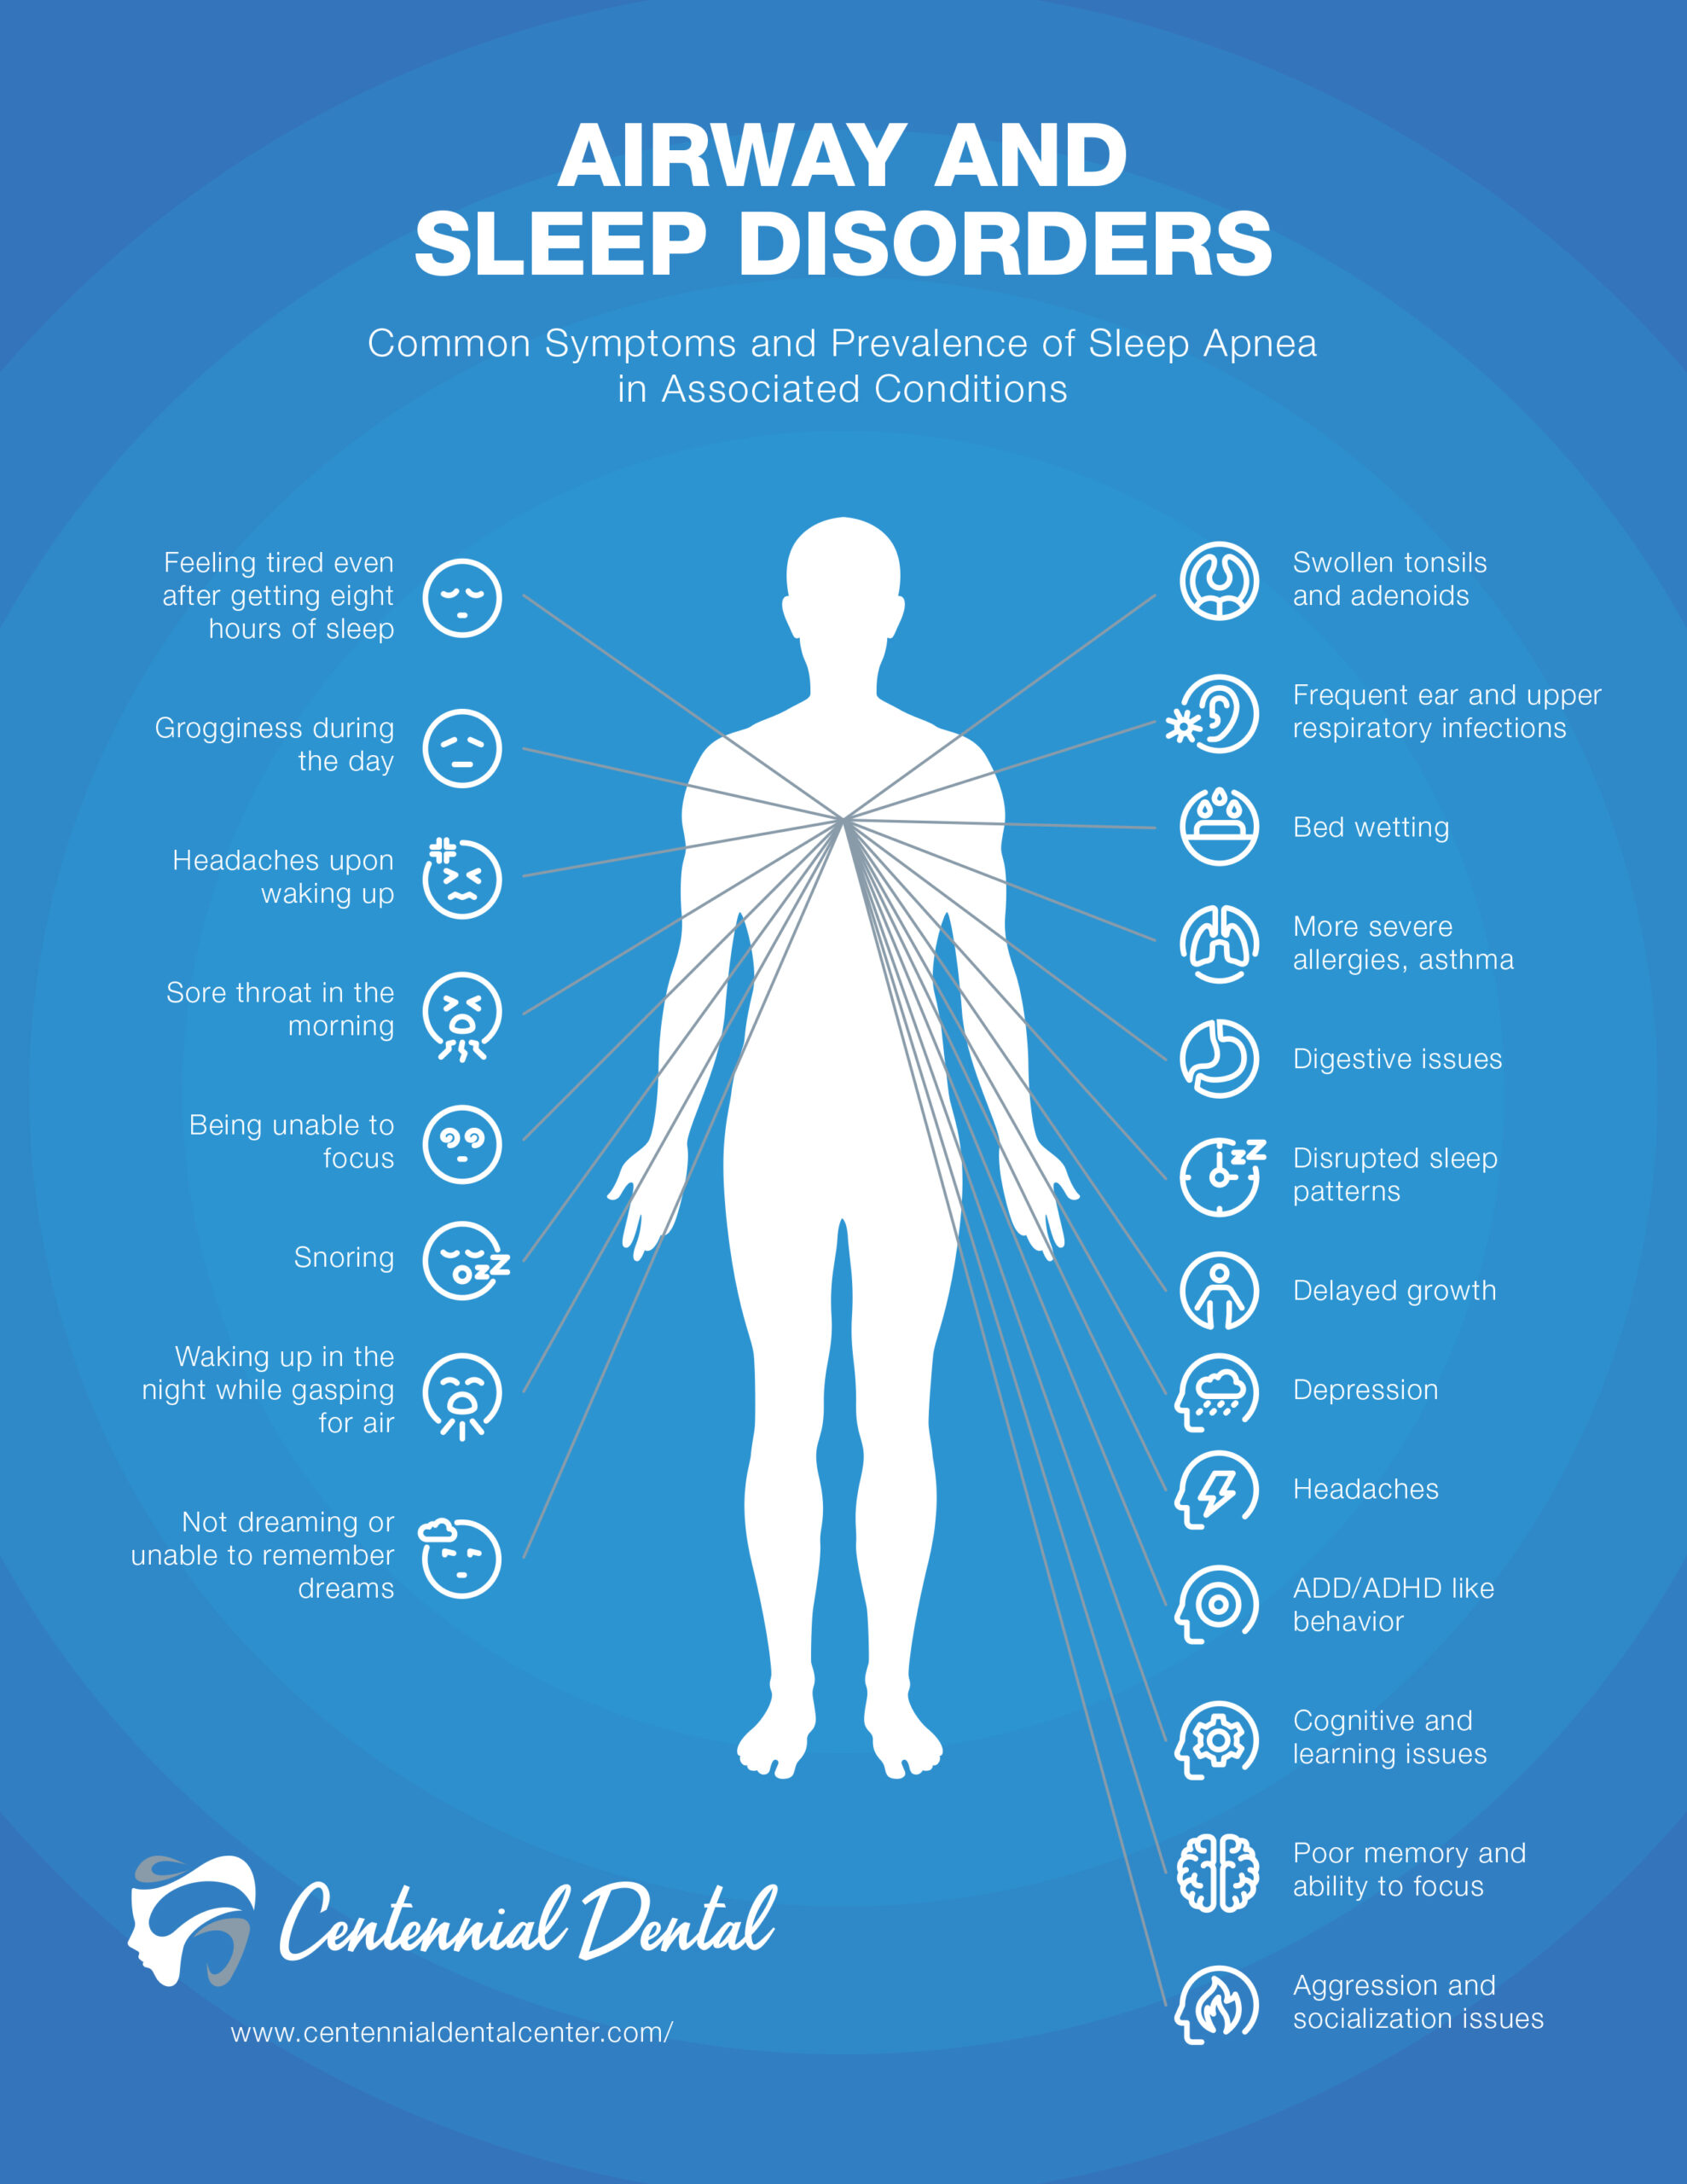 an infographic showing common symptoms of airway and sleep disorders